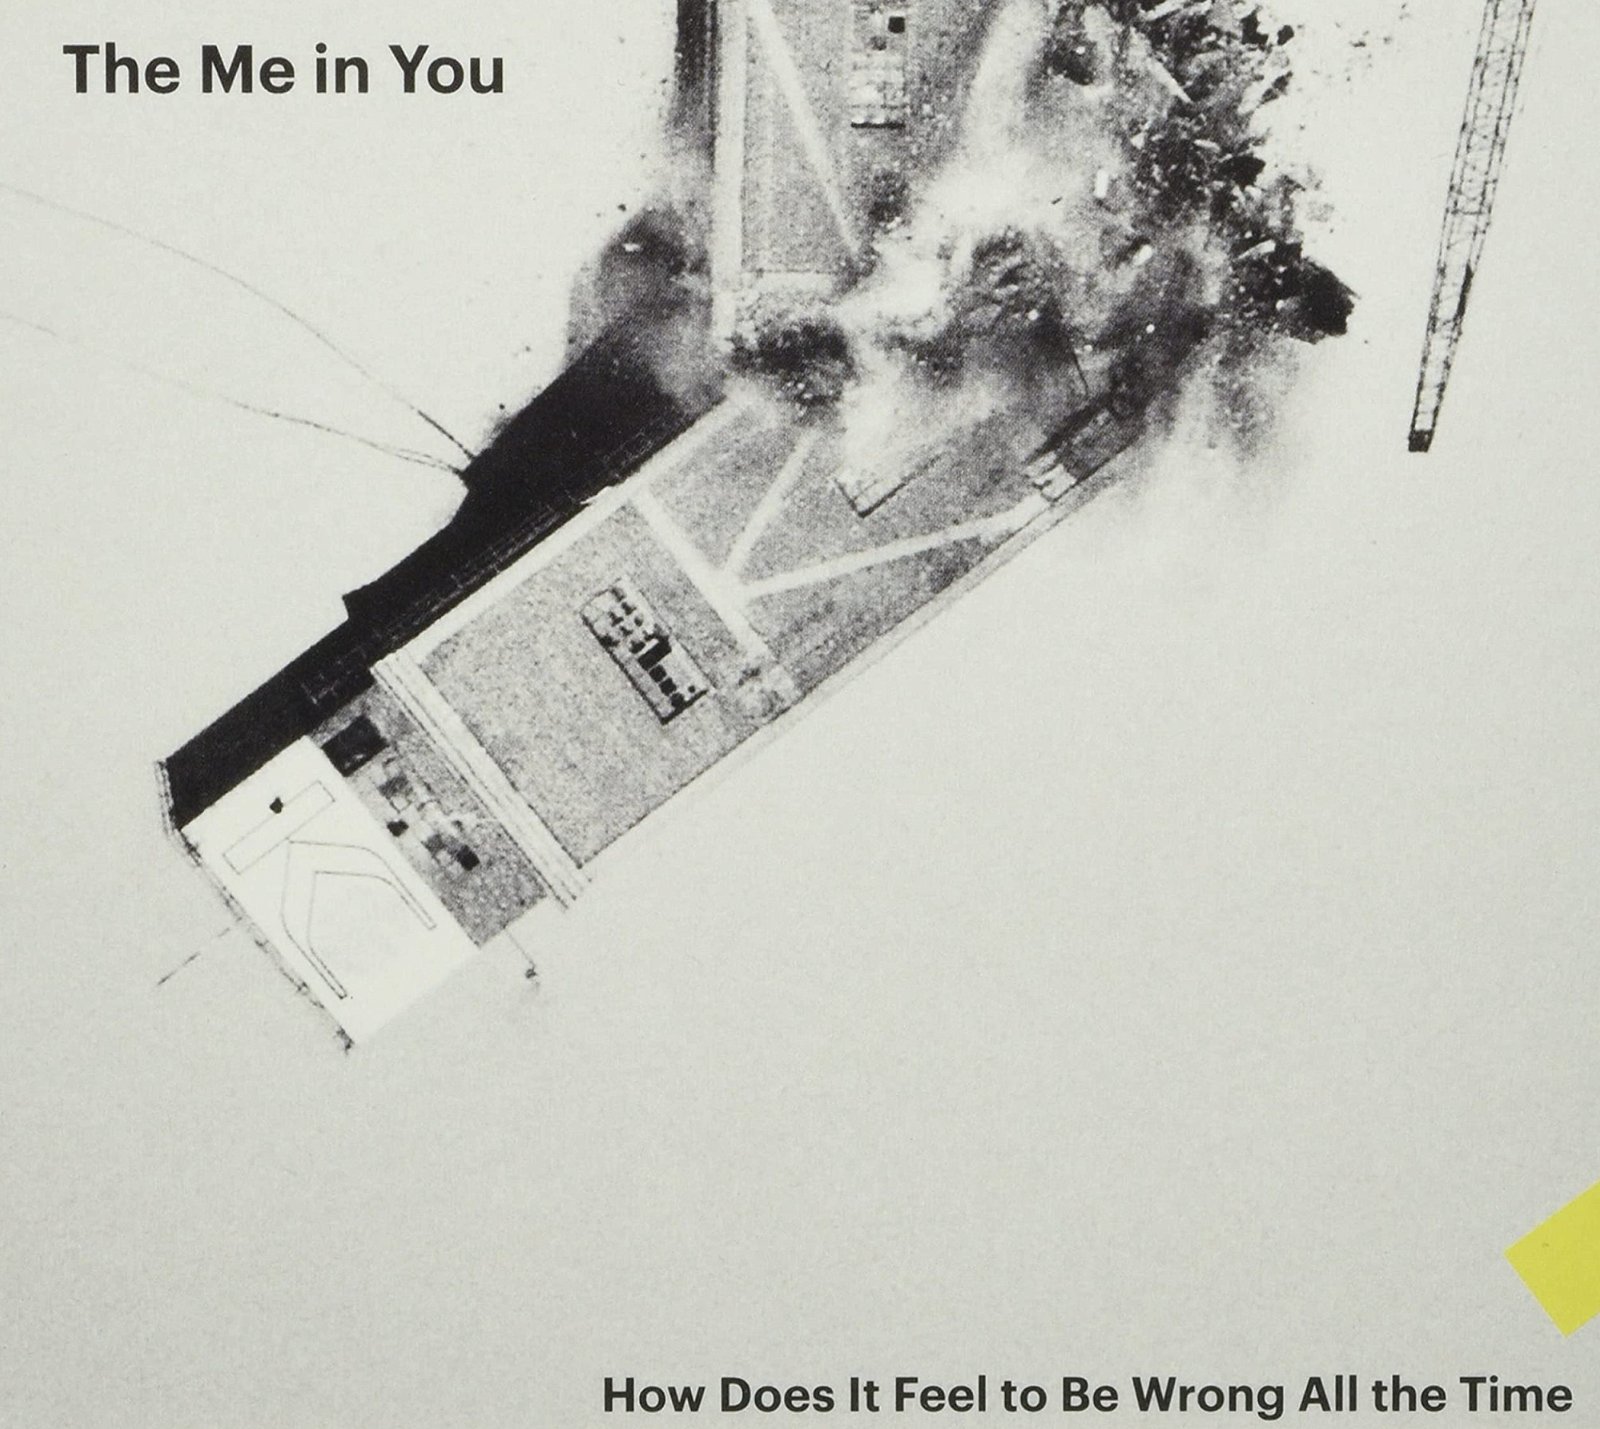 CD Shop - ME IN YOU HOW DOES IT FEEL TO BE WRONG ALL THE TIME